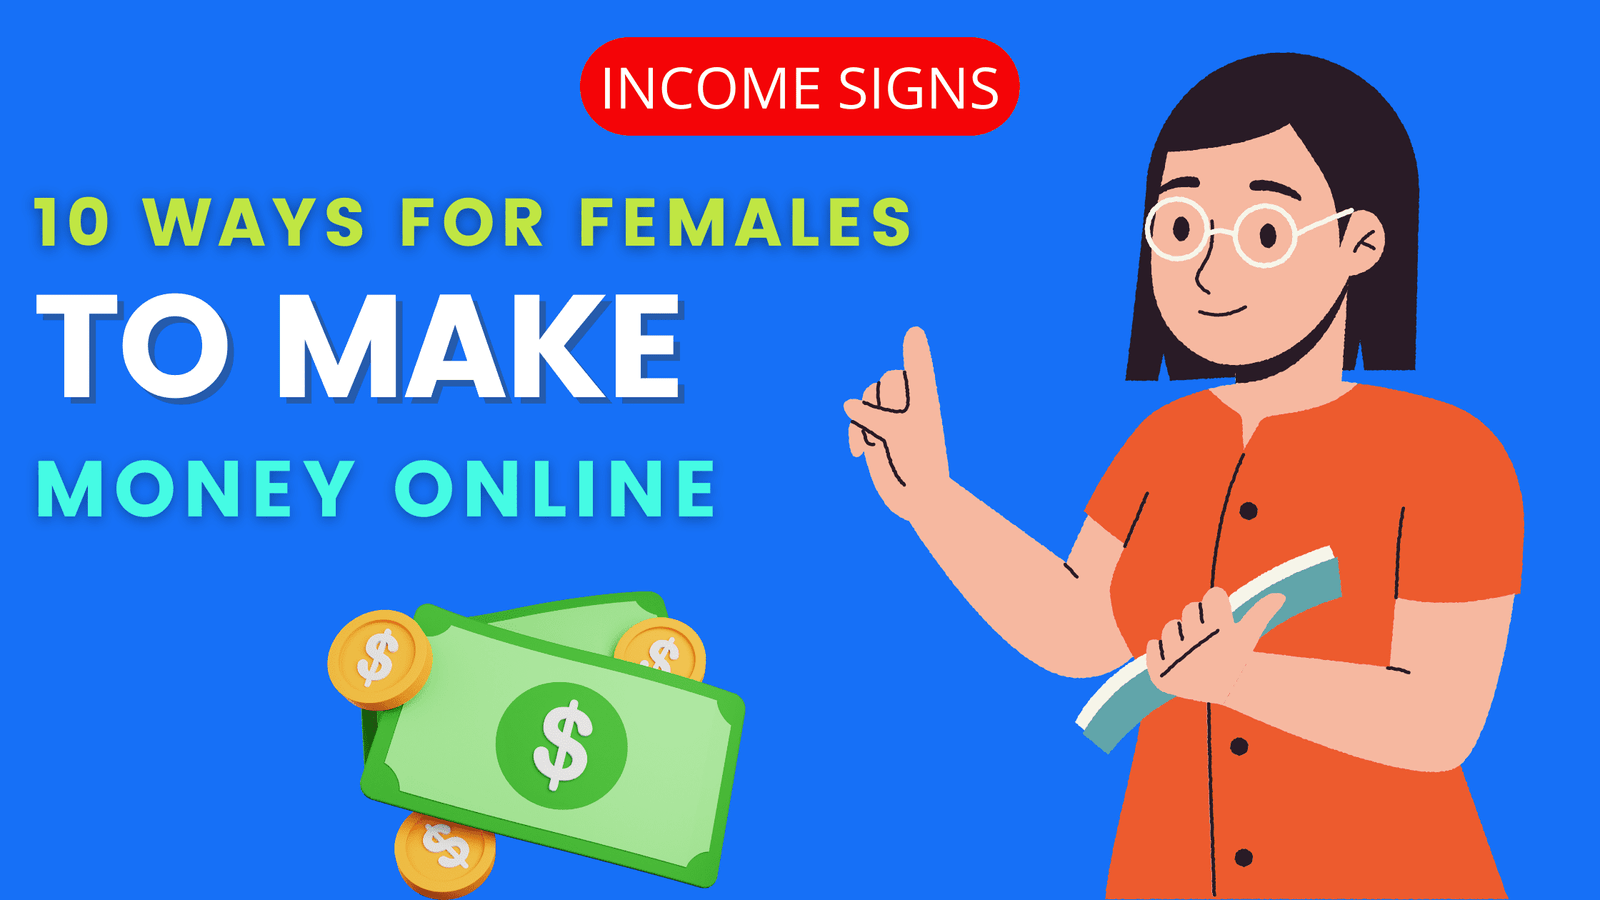 10 Ways for Females to Make Money Online - Income Signs